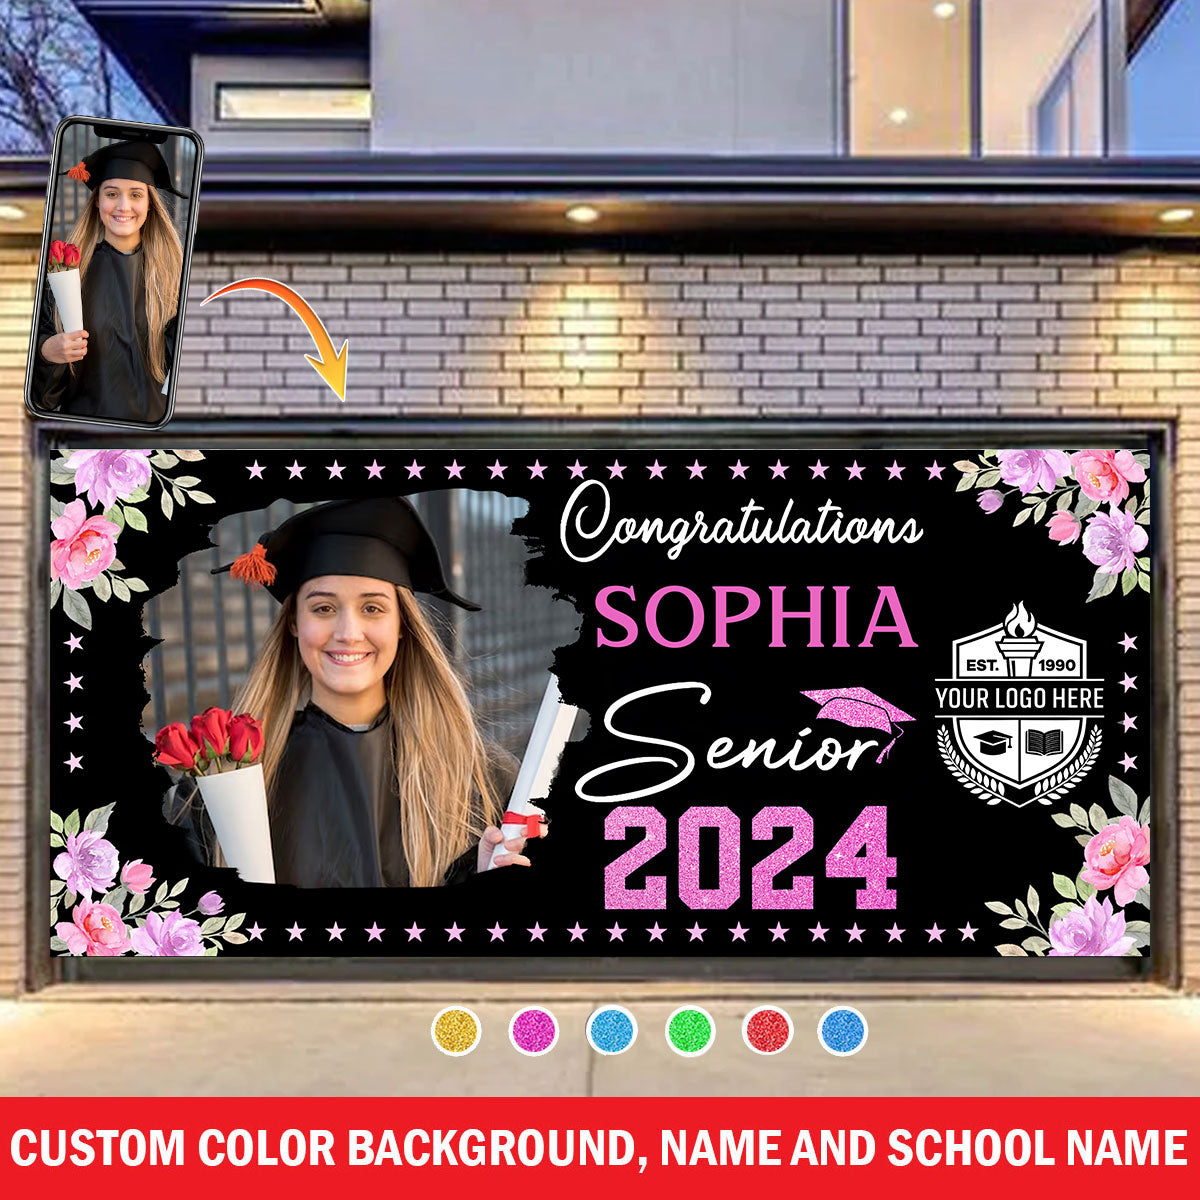 Congratulations Senior 2024 - Personalized Photo, Your Name And School Name Single Garage, Garage Door Banner Covers - Garage Door Banner Decorations